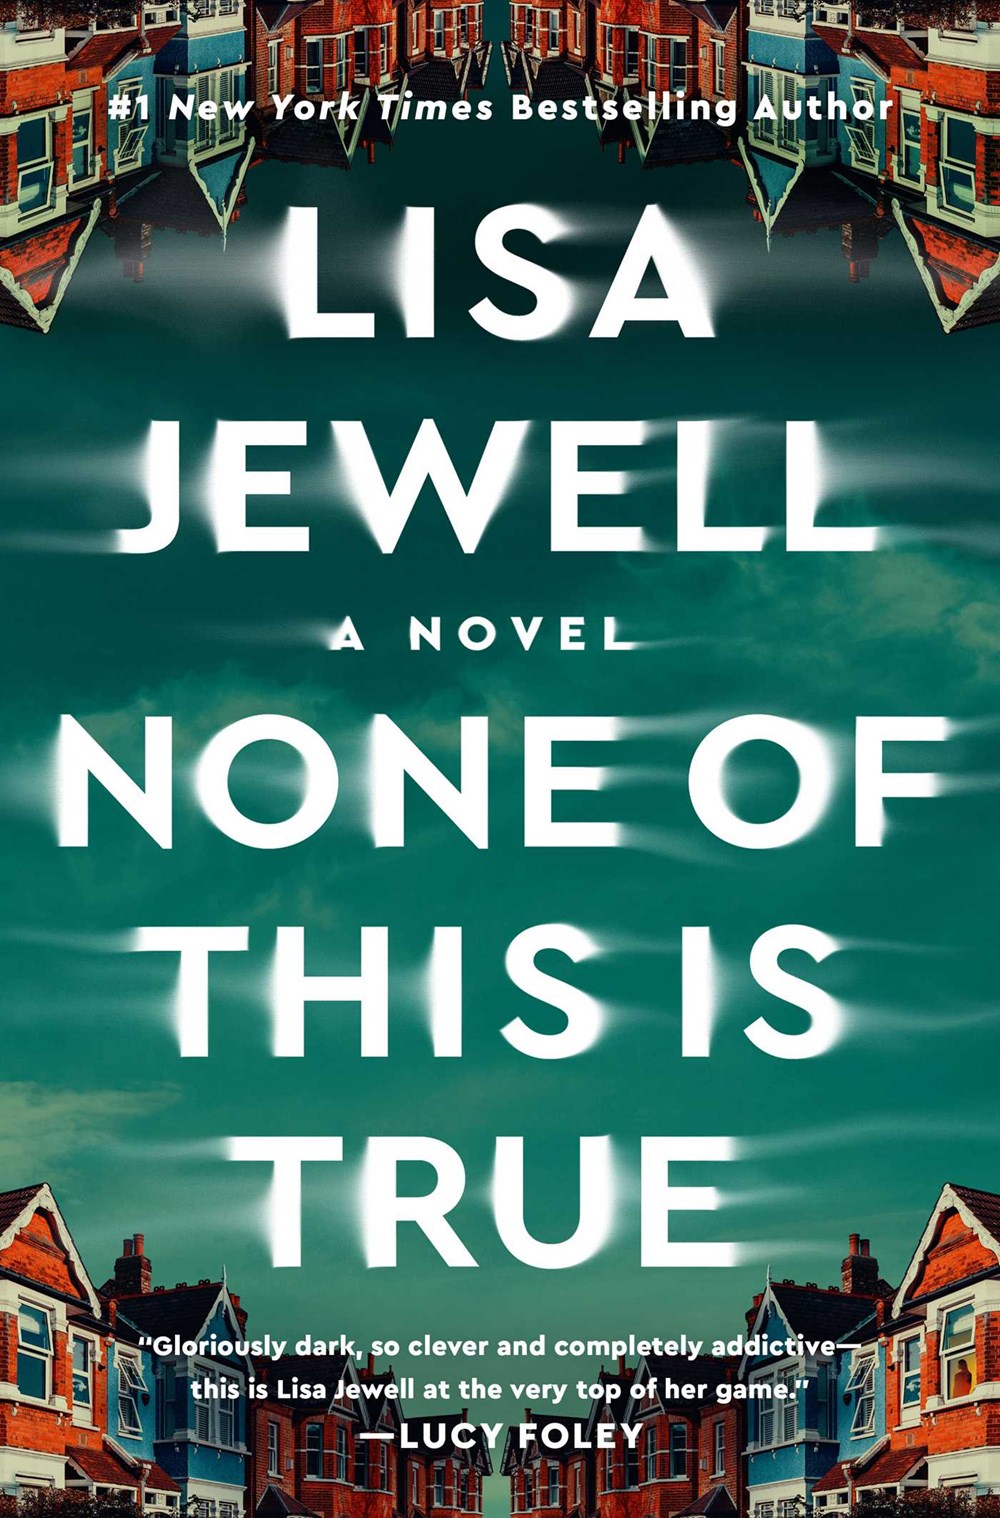 Read-Alikes for ‘None of This Is True’ by Lisa Jewell | LibraryReads